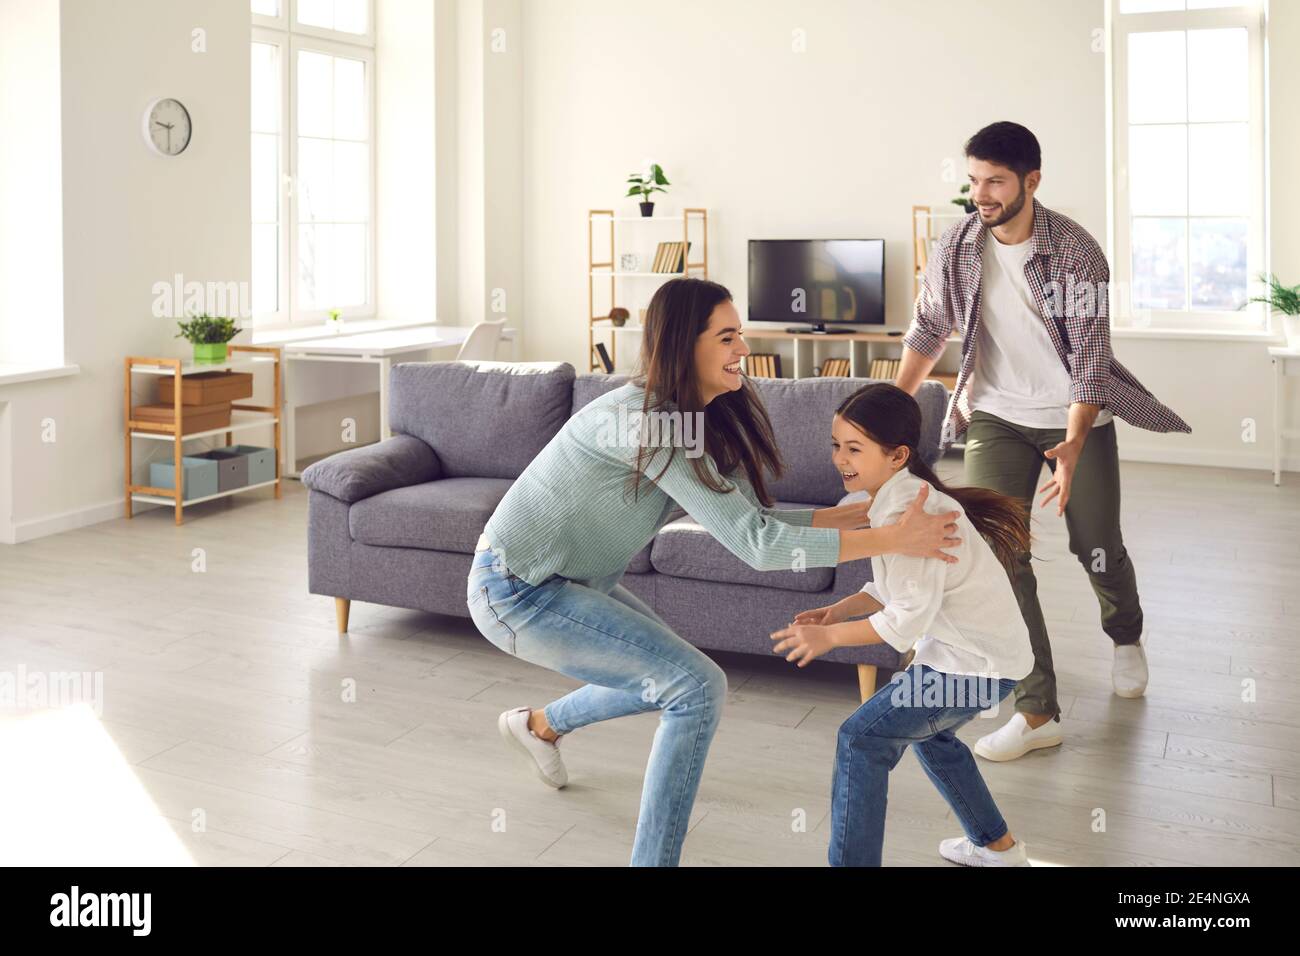 Playful mom, dad and daughter running around the room and fooling around at home during the weekend. Stock Photo